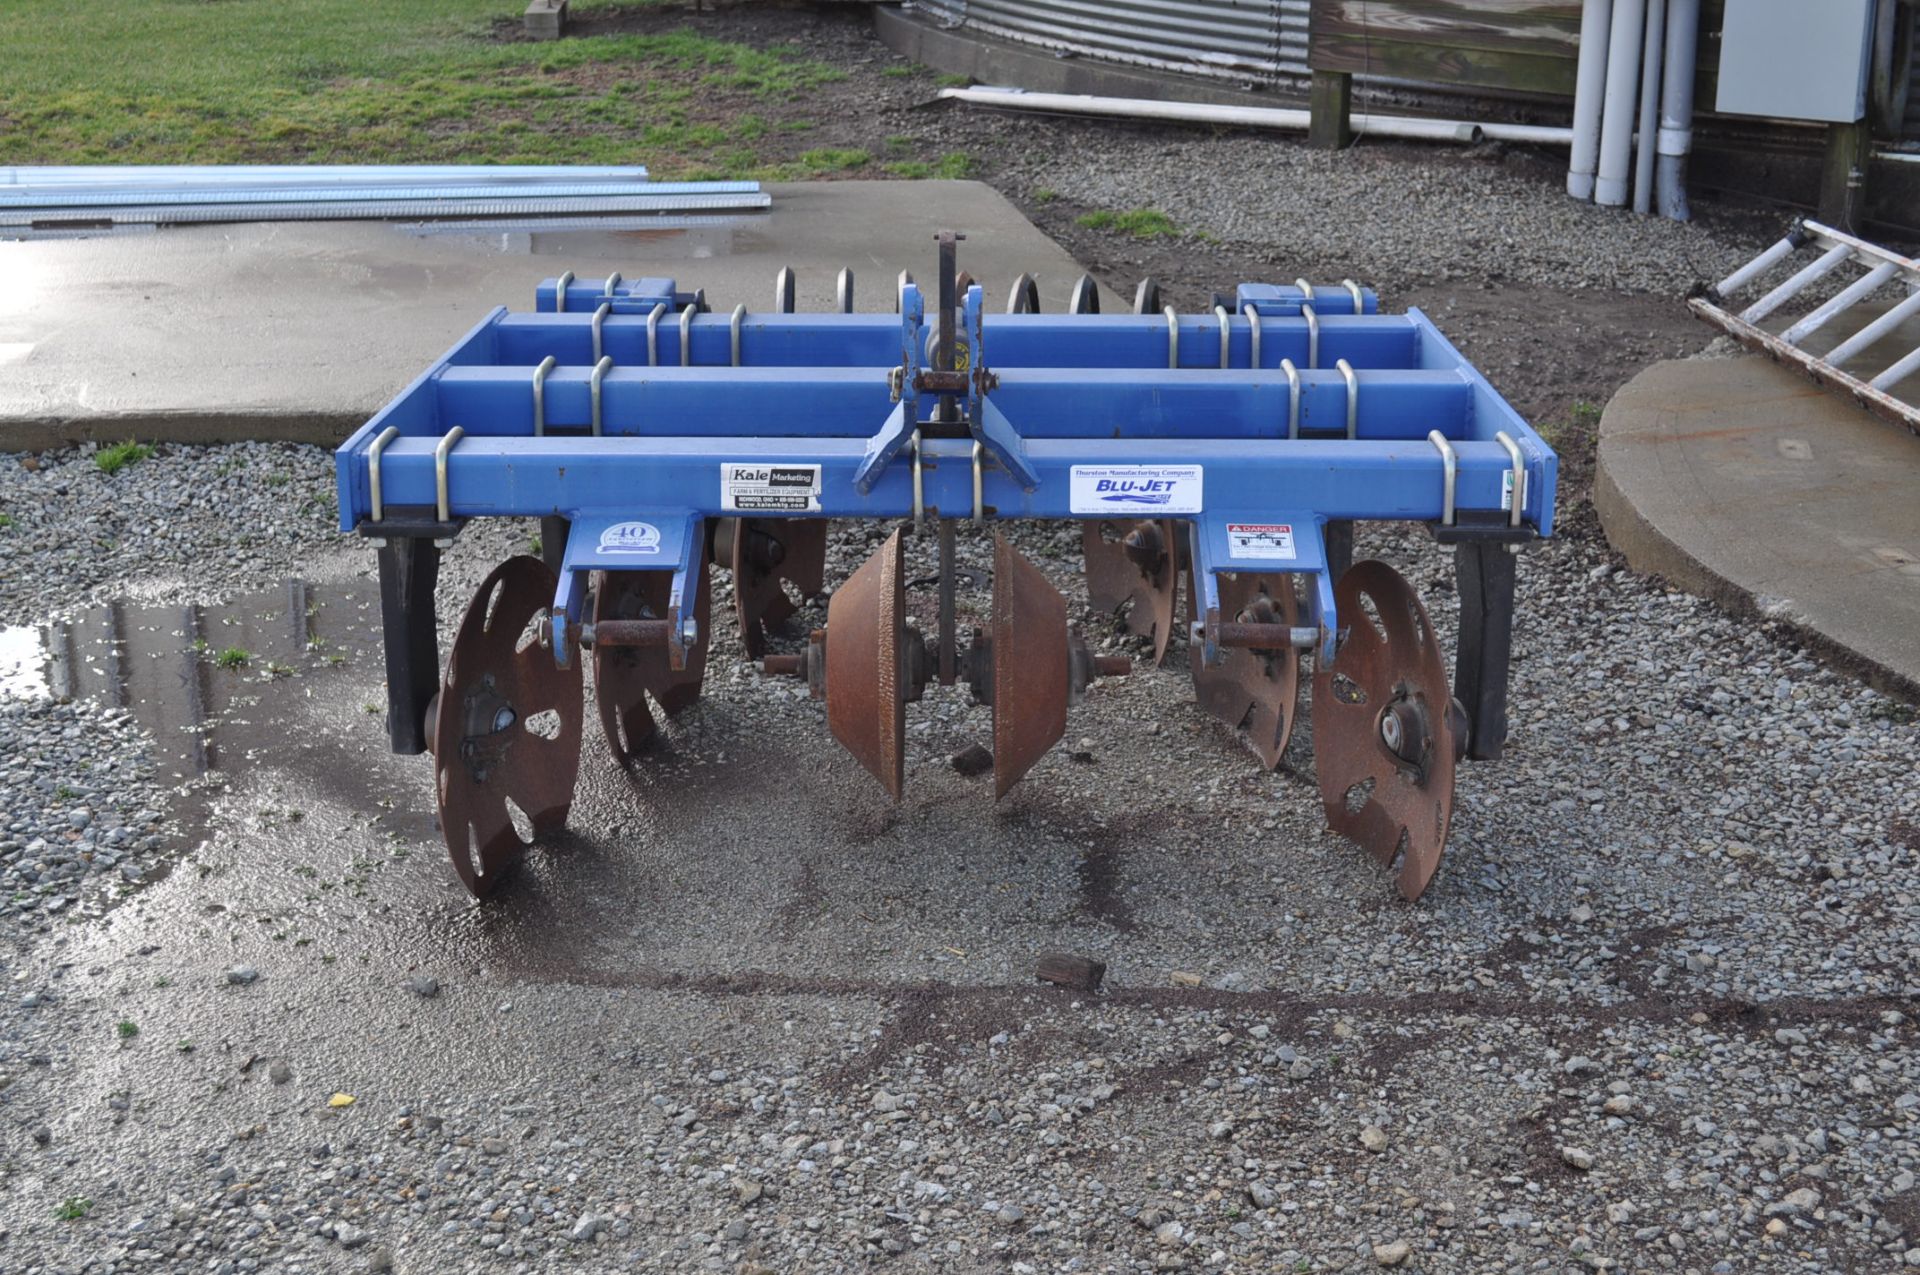 Blu-Jet Trackmaster trench filler, 3 point hitch - Image 2 of 8